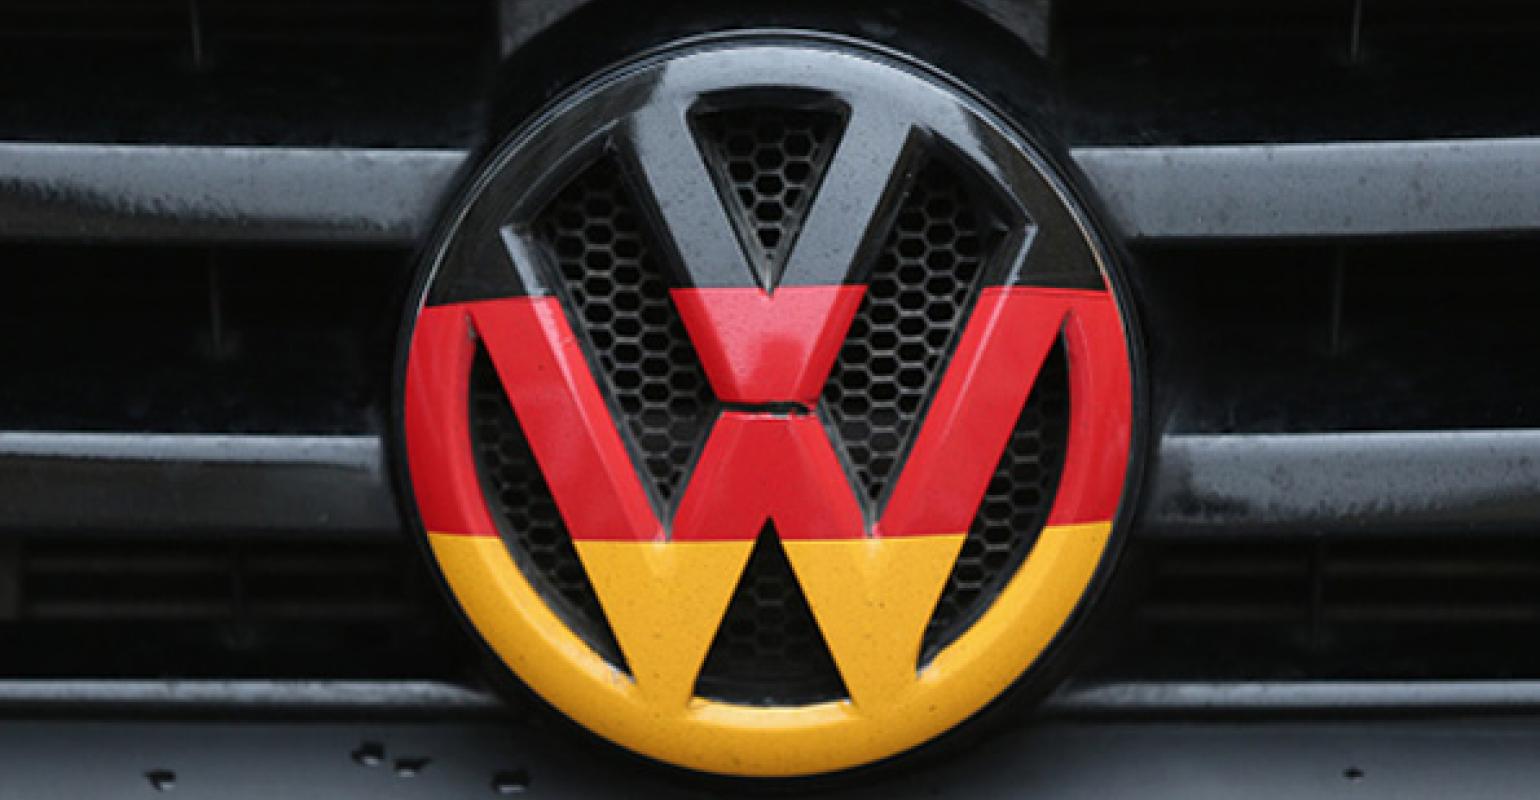 German VW Logo - Volkswagen Taking Action to Curb Future Oversights, Scandals ...